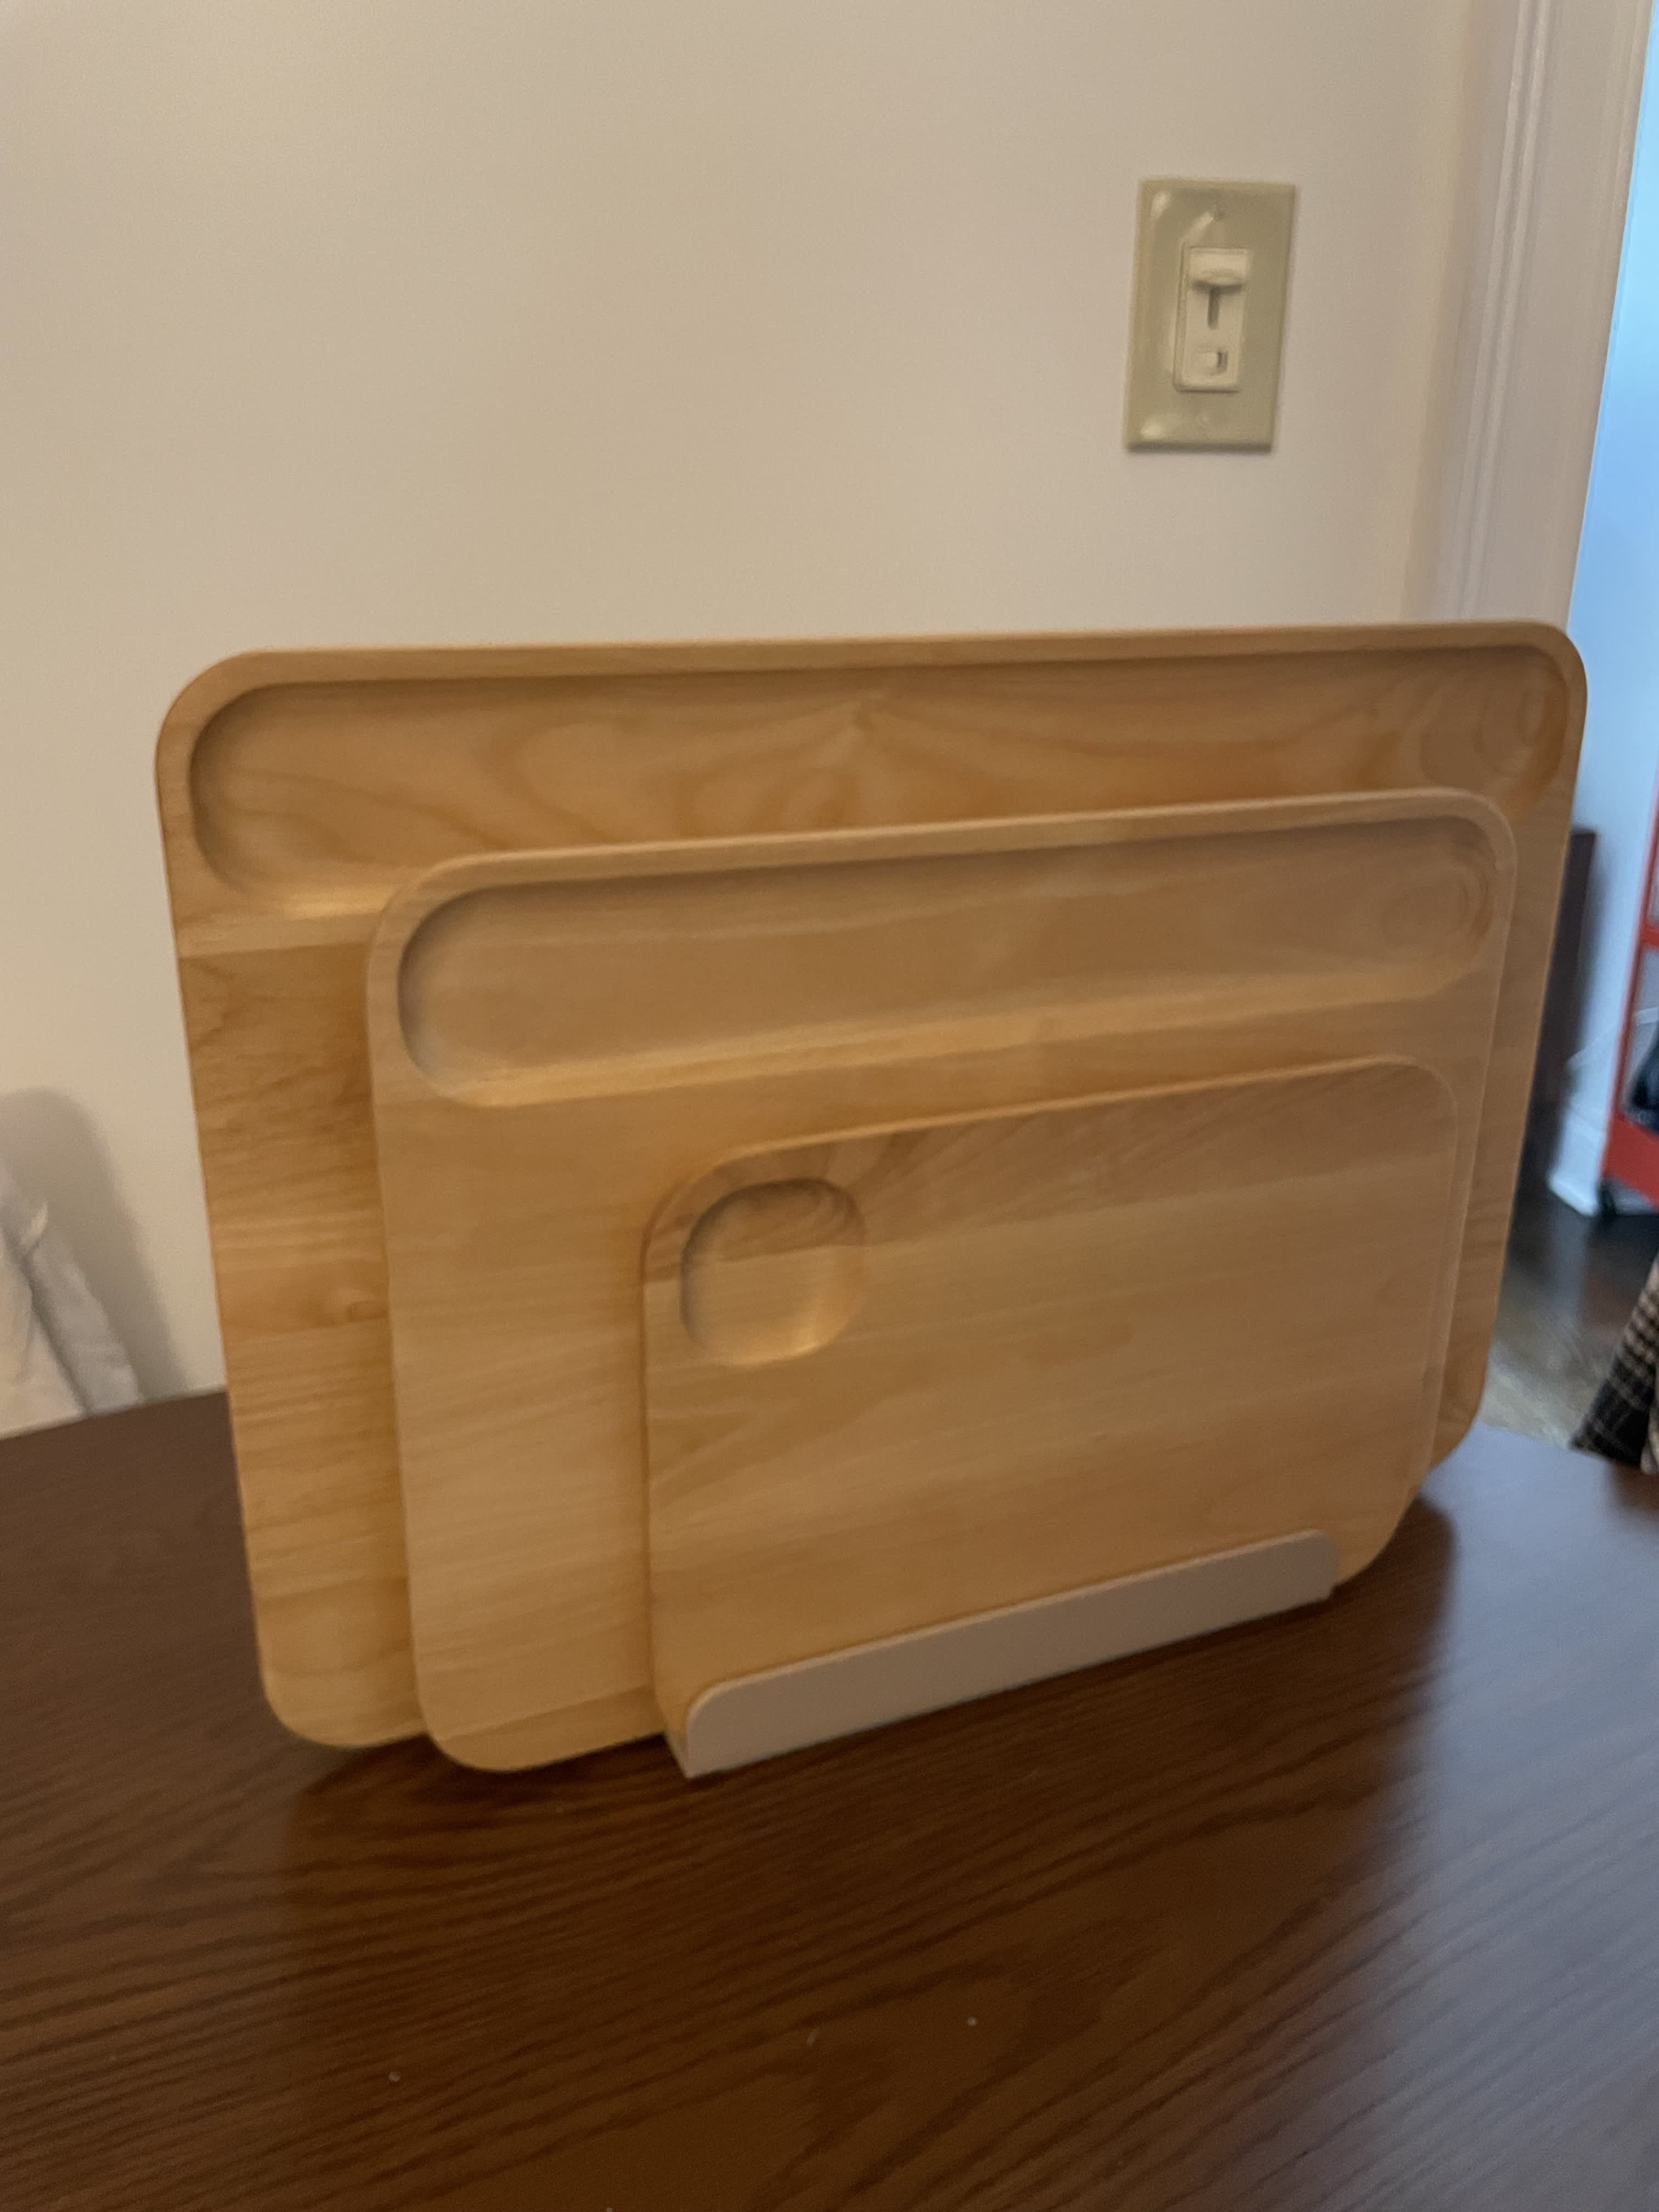 https://cdn.apartmenttherapy.info/image/upload/v1694723678/commerce/caraway-cutting-board-1.jpg